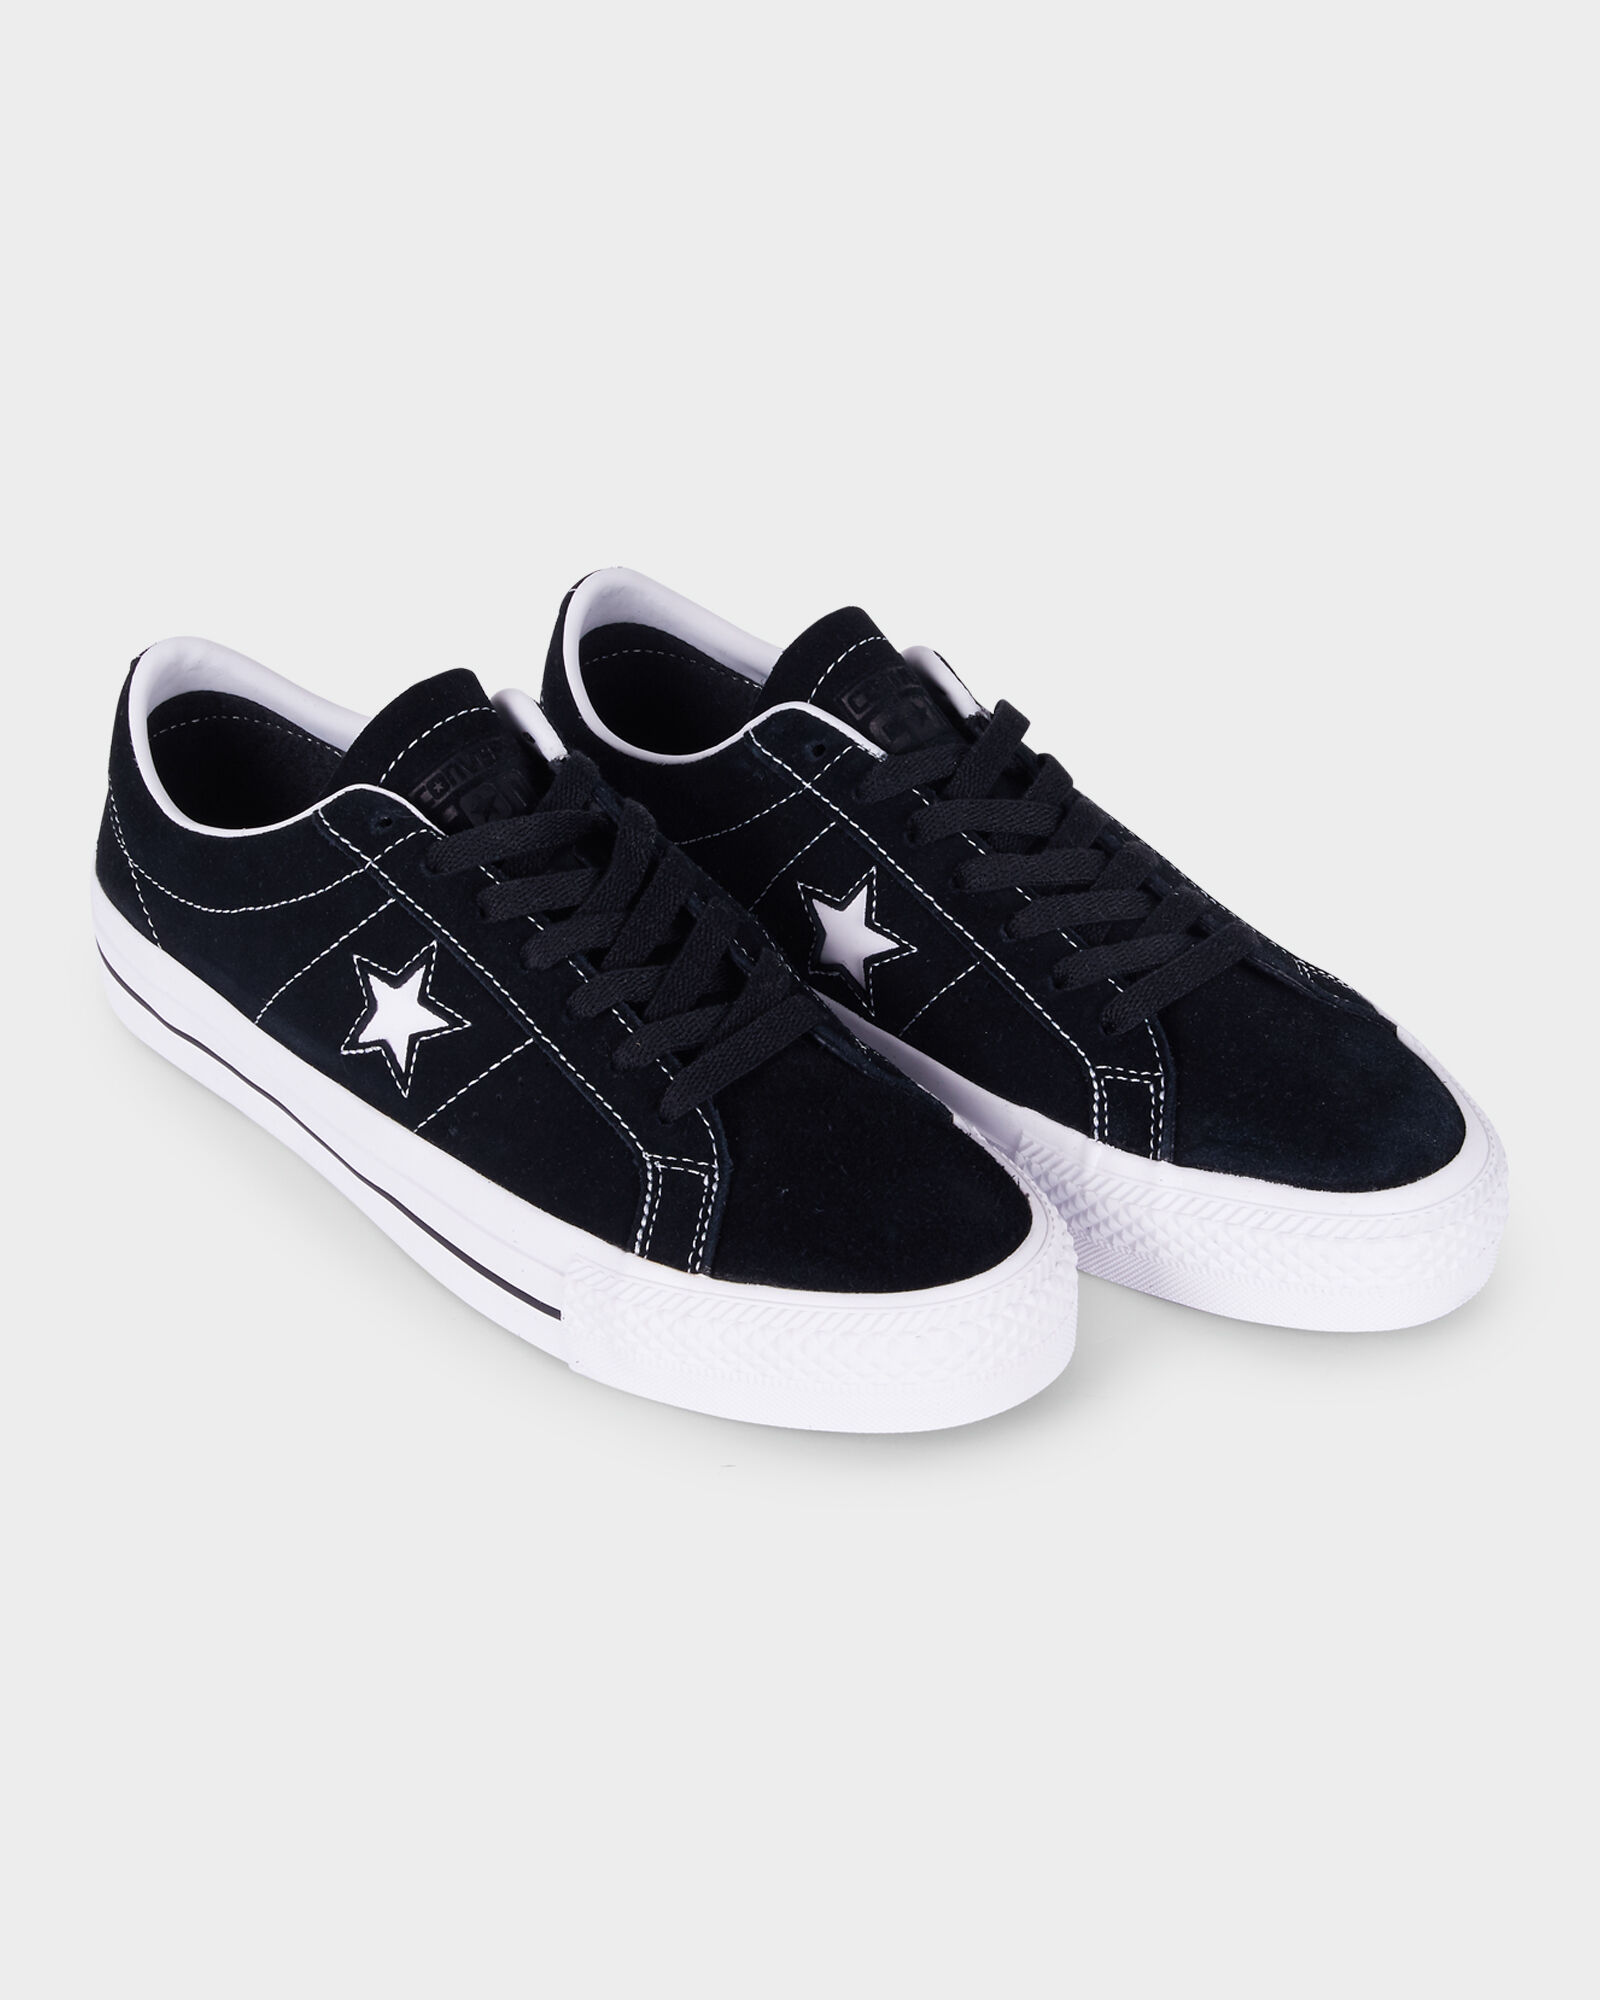 converse one star new zealand